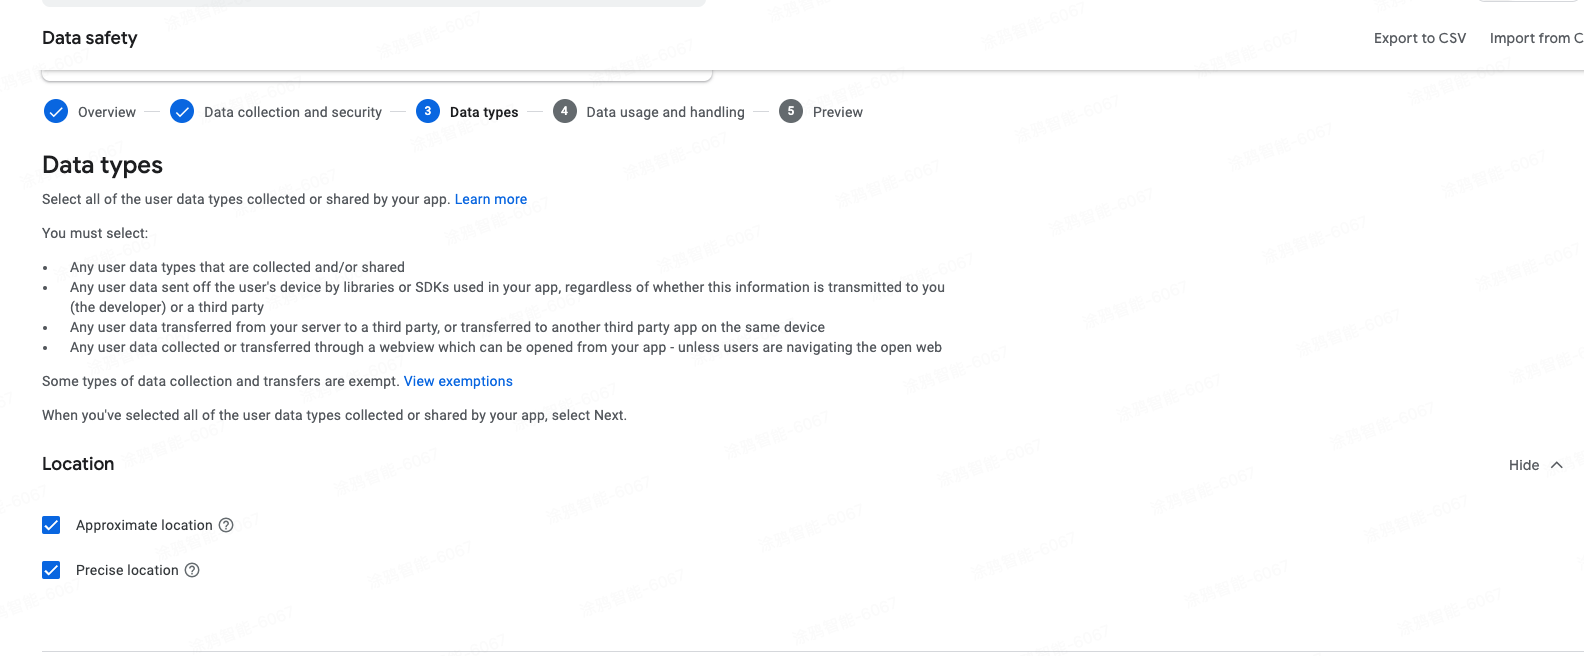 Fill in Google Play's Data Safety Form